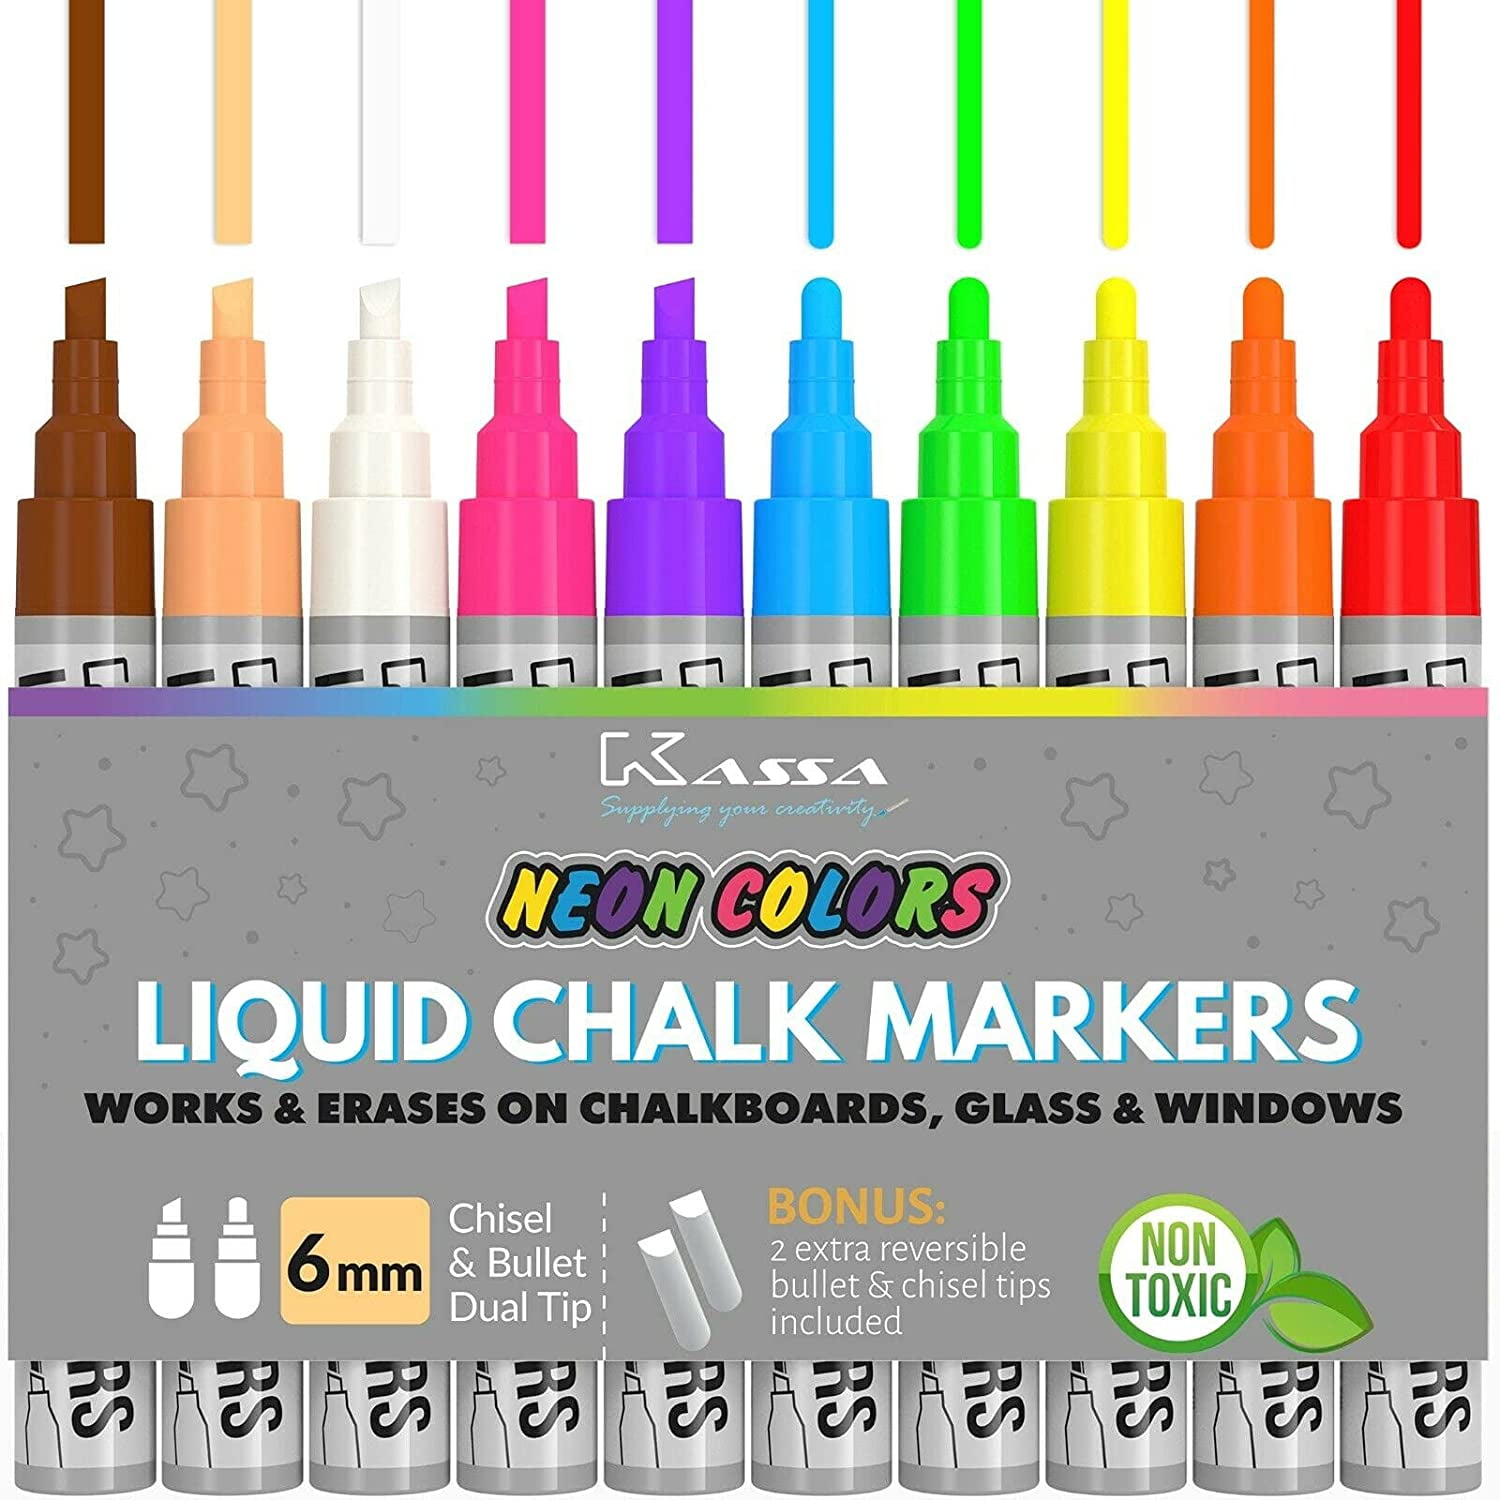 TIIKKASI Black Liquid Chalk Markers Set (8 Pack), Wet Erase Drawing Paint  Pens, 6mm Reversible Dual Tip Bold & Chisel, for Whiteboard Glass Windows